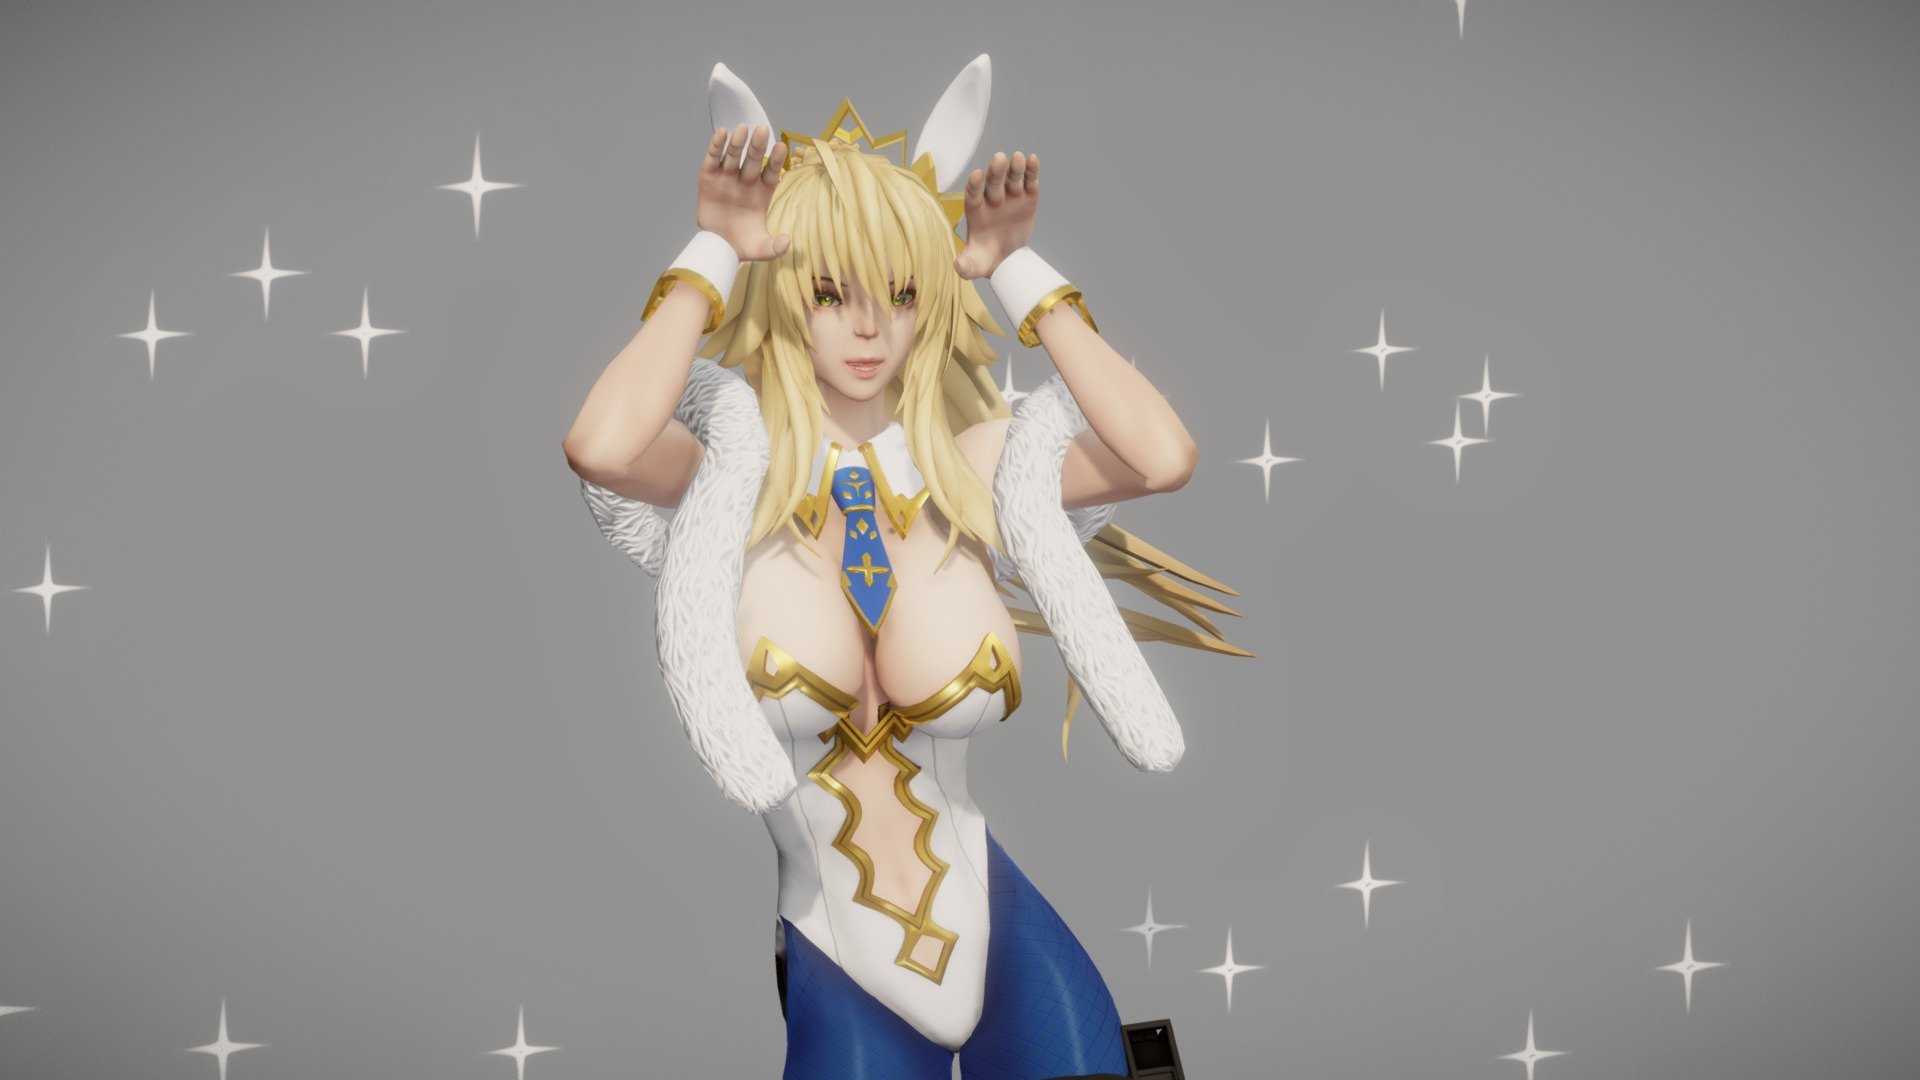 Fate/Grand Order(FGO) よりルーラー/アルトリア・ペンドラゴン(バニ上) 3Dモデルを作成しました。

I modeling the 3D model of Ruler/Altria Pendragon from Fate / Grand Order(FGO).



▼ArtStation：作業成果物 - Deliverable

https://www.artstation.com/artwork/lxy0AV

▼Youtube：作業風景動画 - Work Scenery Movie

Part1：https://youtu.be/FMyRU1KYihg

Part2：https://youtu.be/d4LdEJYCd7w

Part3：https://youtu.be/MUJmh5MuBSU

よろしければ上記コンテンツもご覧いただけると嬉しいです。

I would be grateful if you could see the above contents as well 3d model